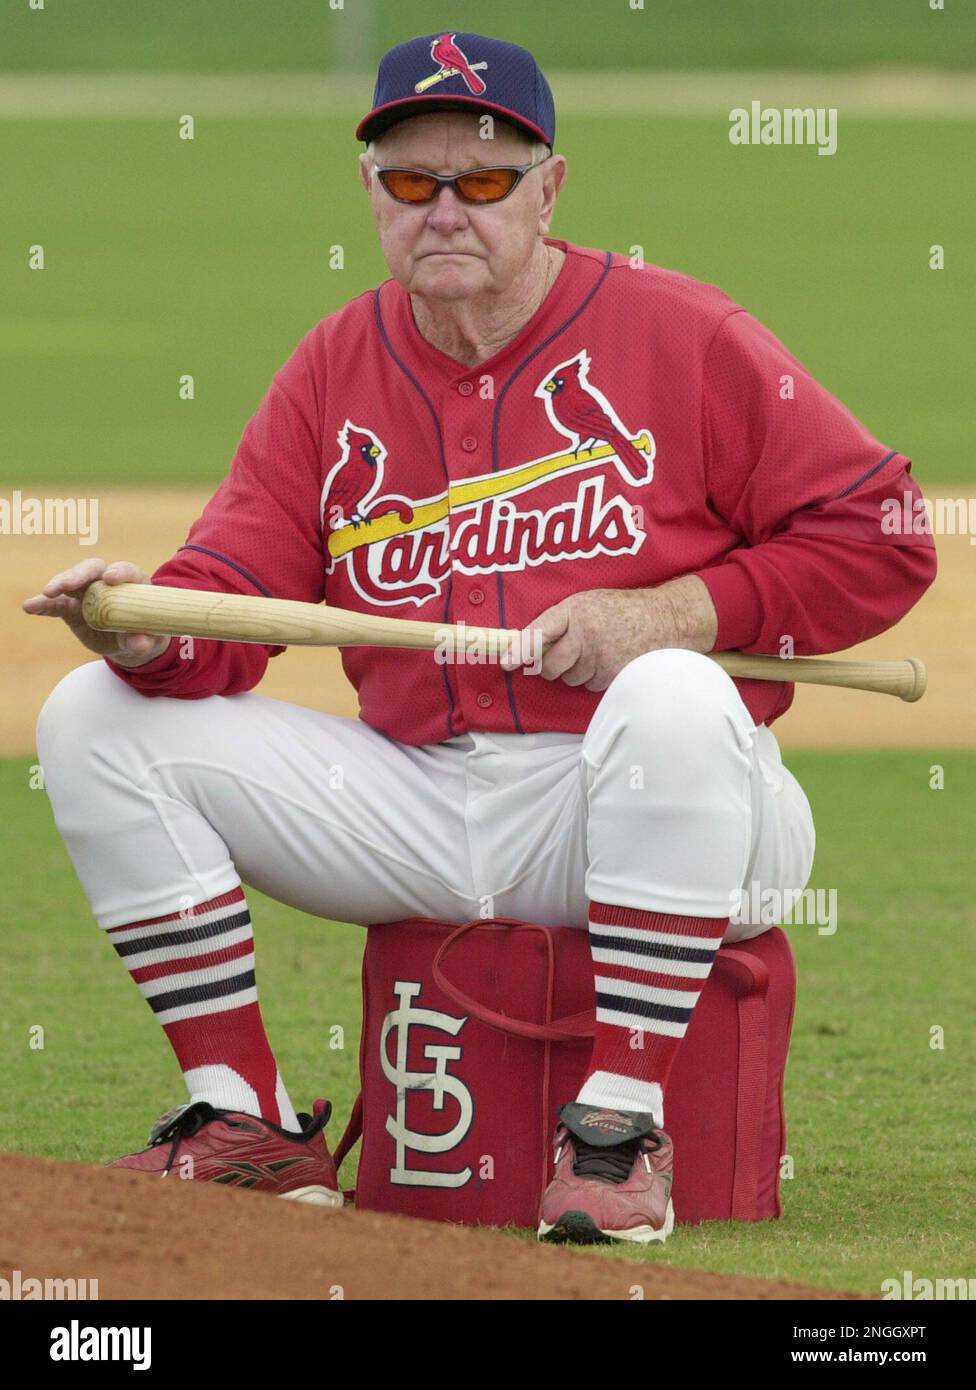 https://c8.alamy.com/comp/2NGGXPT/st-louis-cardinals-hall-of-famer-albert-red-schoendienst-watches-practice-while-seated-behind-the-mound-during-spring-training-feb-22-2002-in-jupiter-fla-in-1943-when-schoendienst-signed-his-first-professional-contract-he-gave-himself-four-or-five-years-to-make-it-in-baseball-and-60-years-later-hes-still-wearing-a-st-louis-cardinals-uniform-and-wielding-a-fungo-bat-in-spring-training-ap-photojames-a-finley-2NGGXPT.jpg